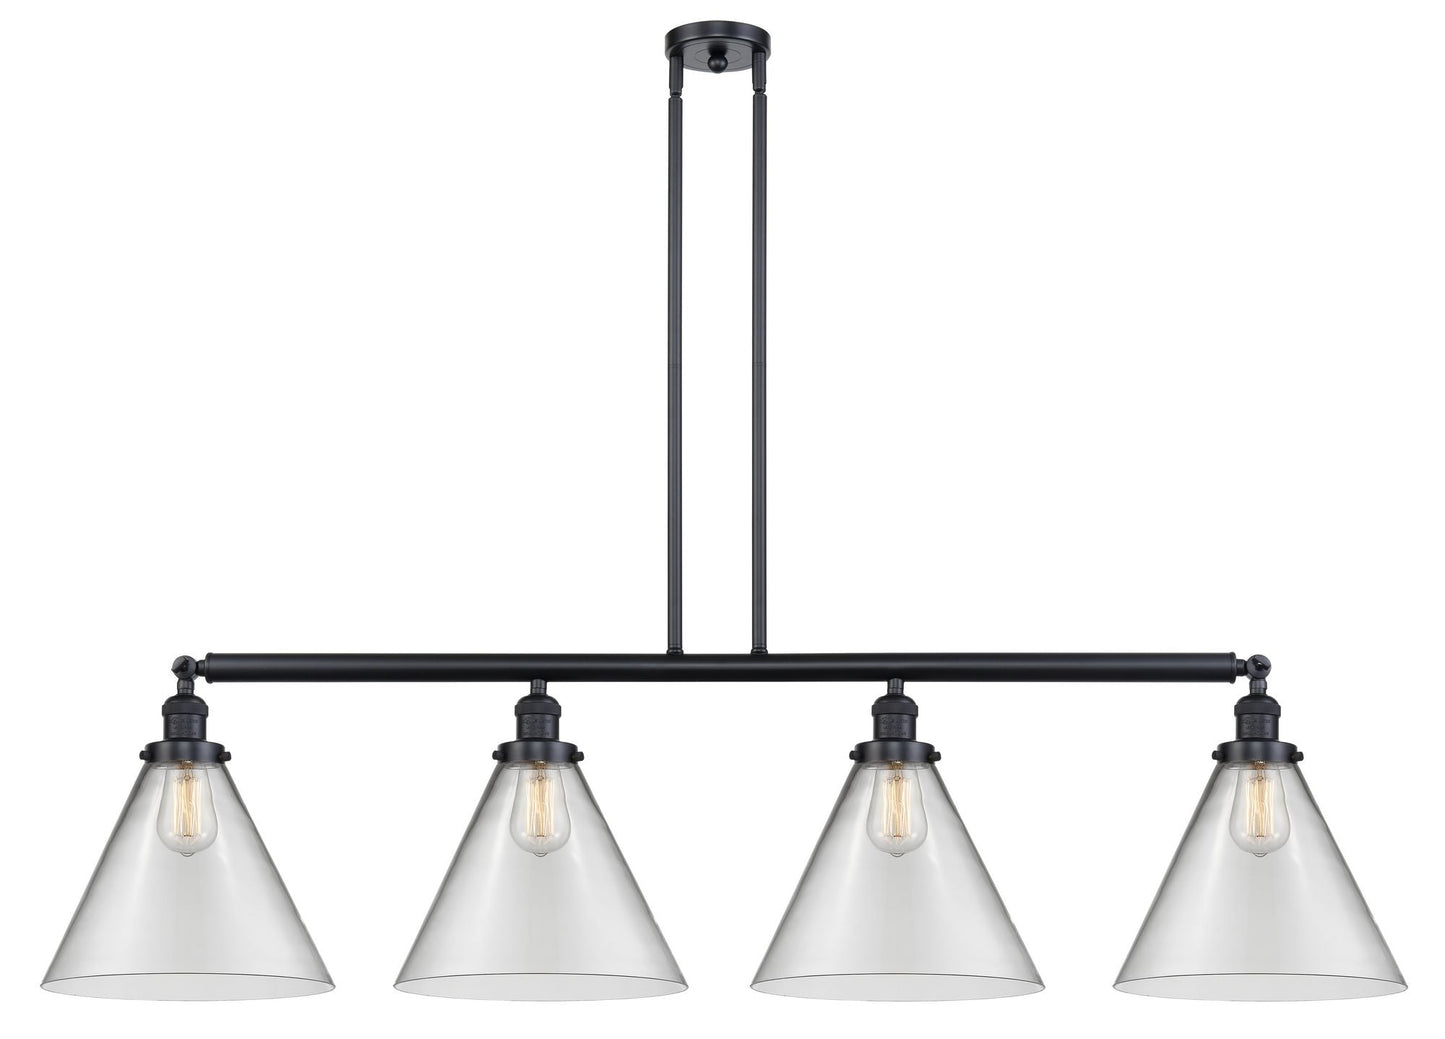 214-BK-G42-L 4-Light 56" Matte Black Island Light - Clear Cone 12" Glass - LED Bulb - Dimmensions: 56 x 12 x 14<br>Minimum Height : 24.25<br>Maximum Height : 48.25 - Sloped Ceiling Compatible: Yes